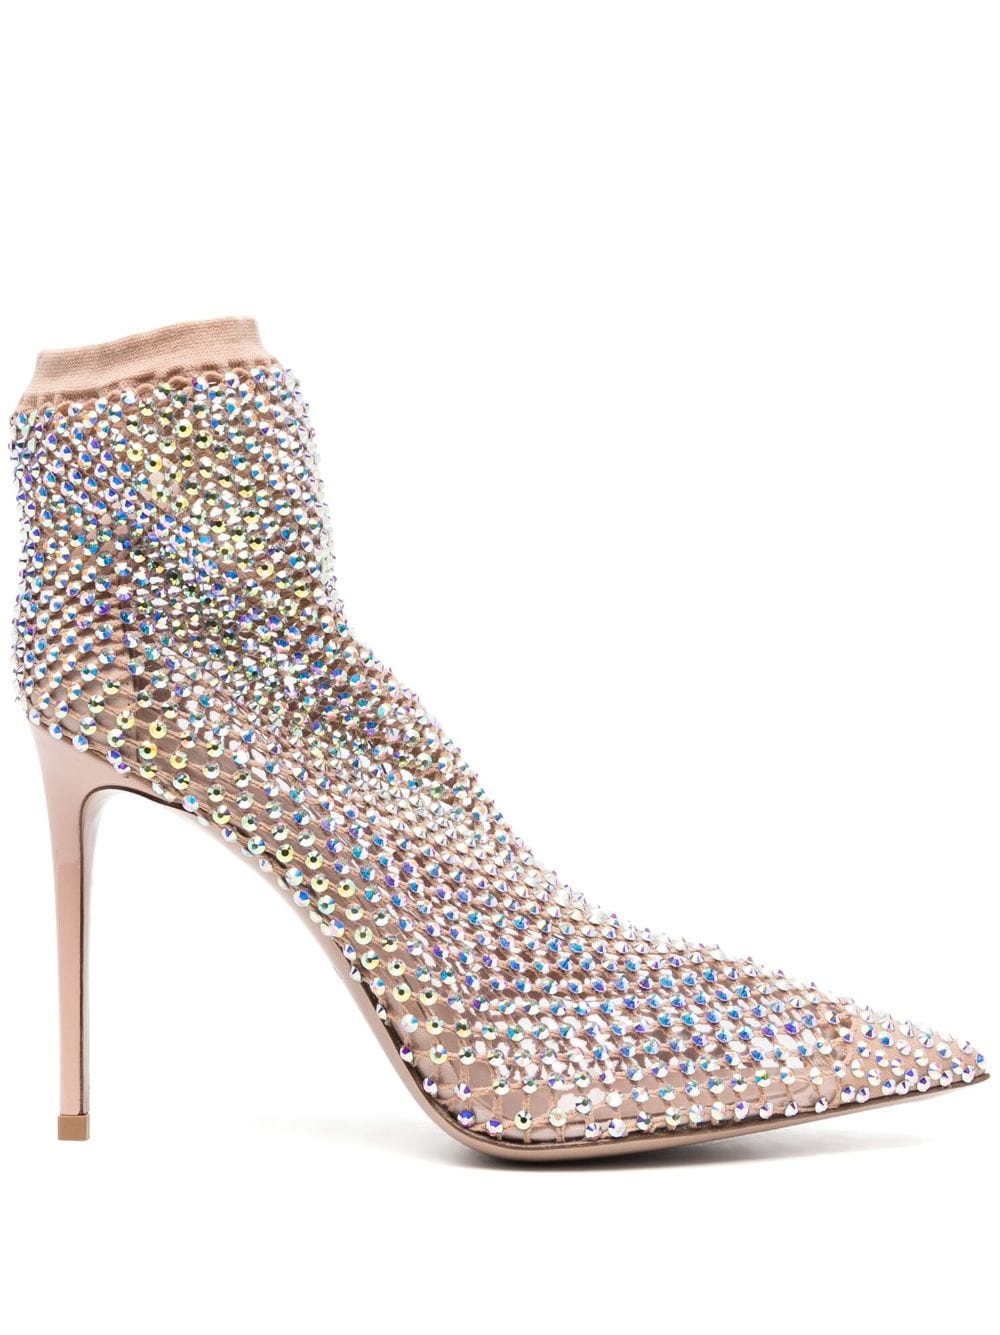 Le Silla 110mm crystal-embellished perforated pumps - Neutrals